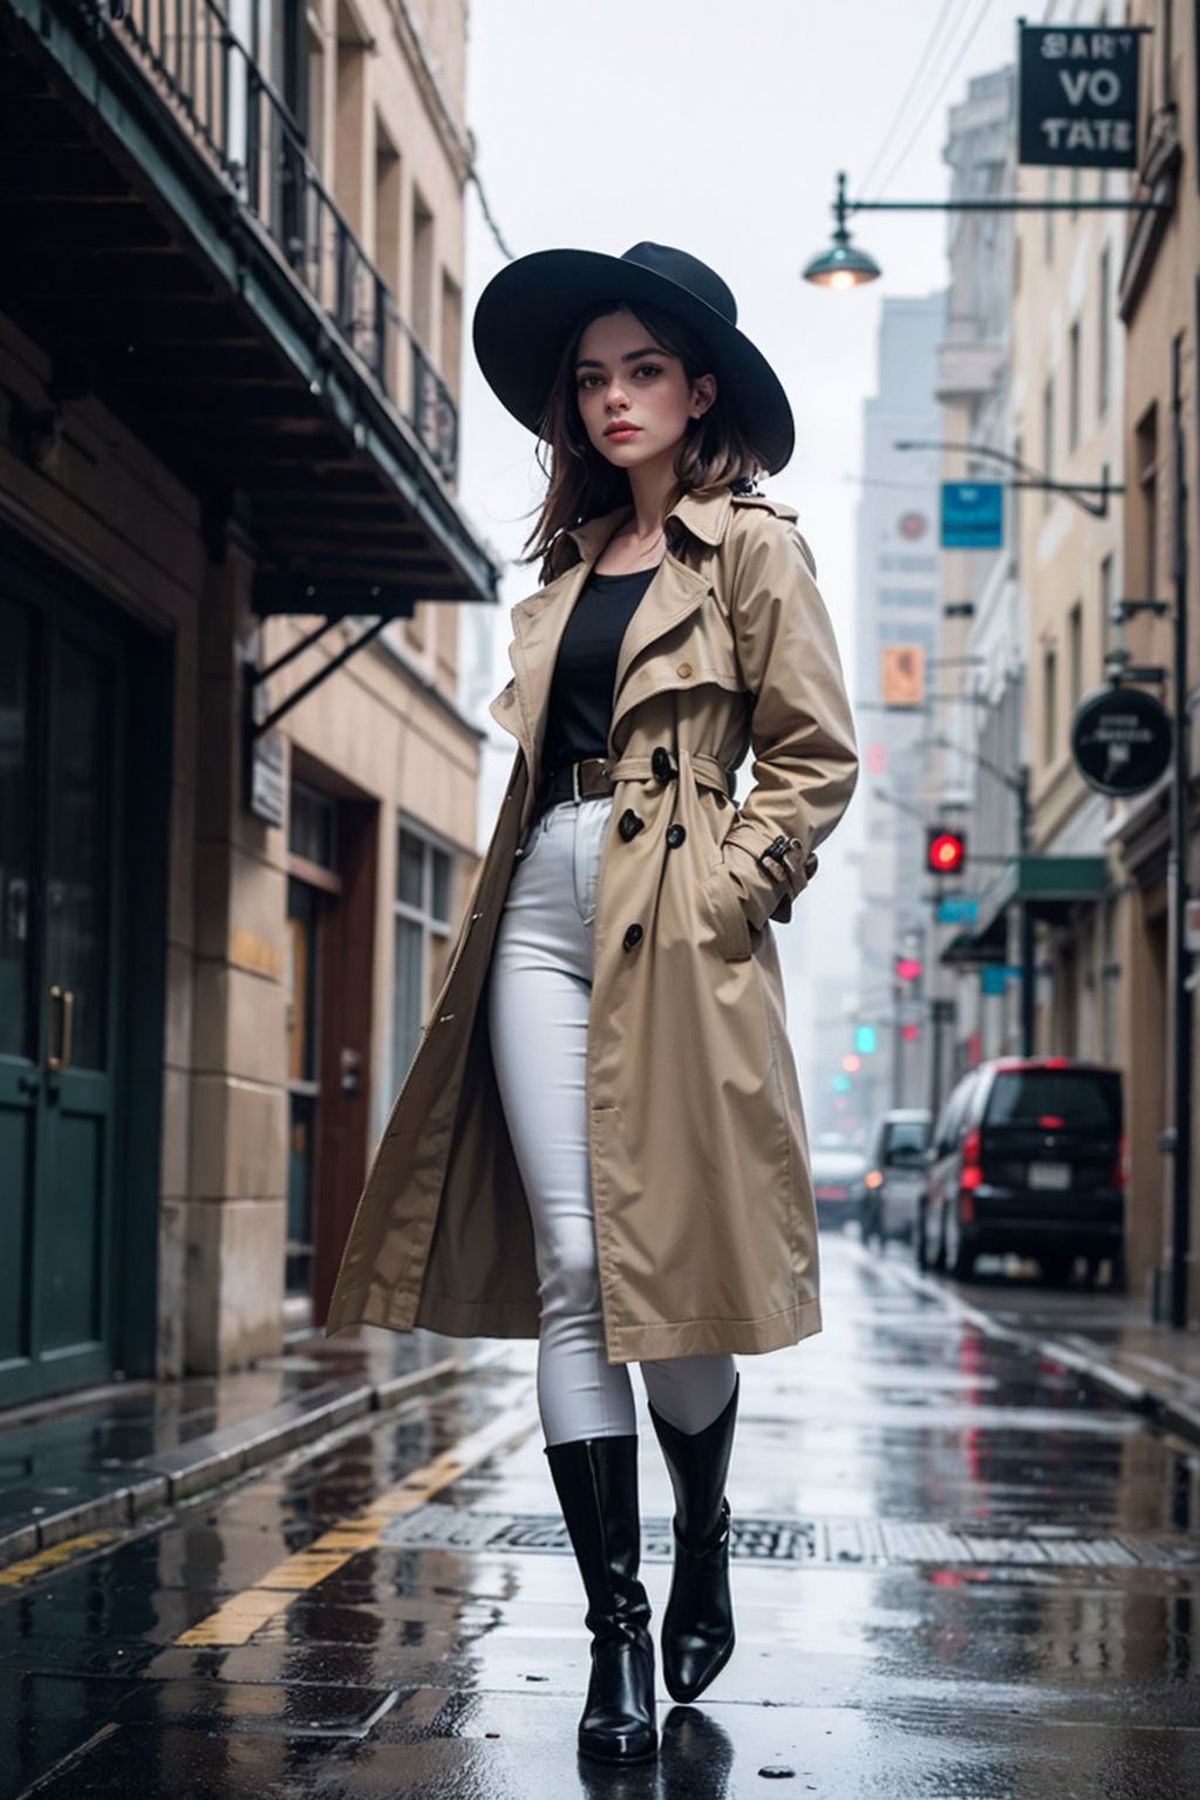 A woman wearing a black top and a tan trench coat stands on a rainy street.